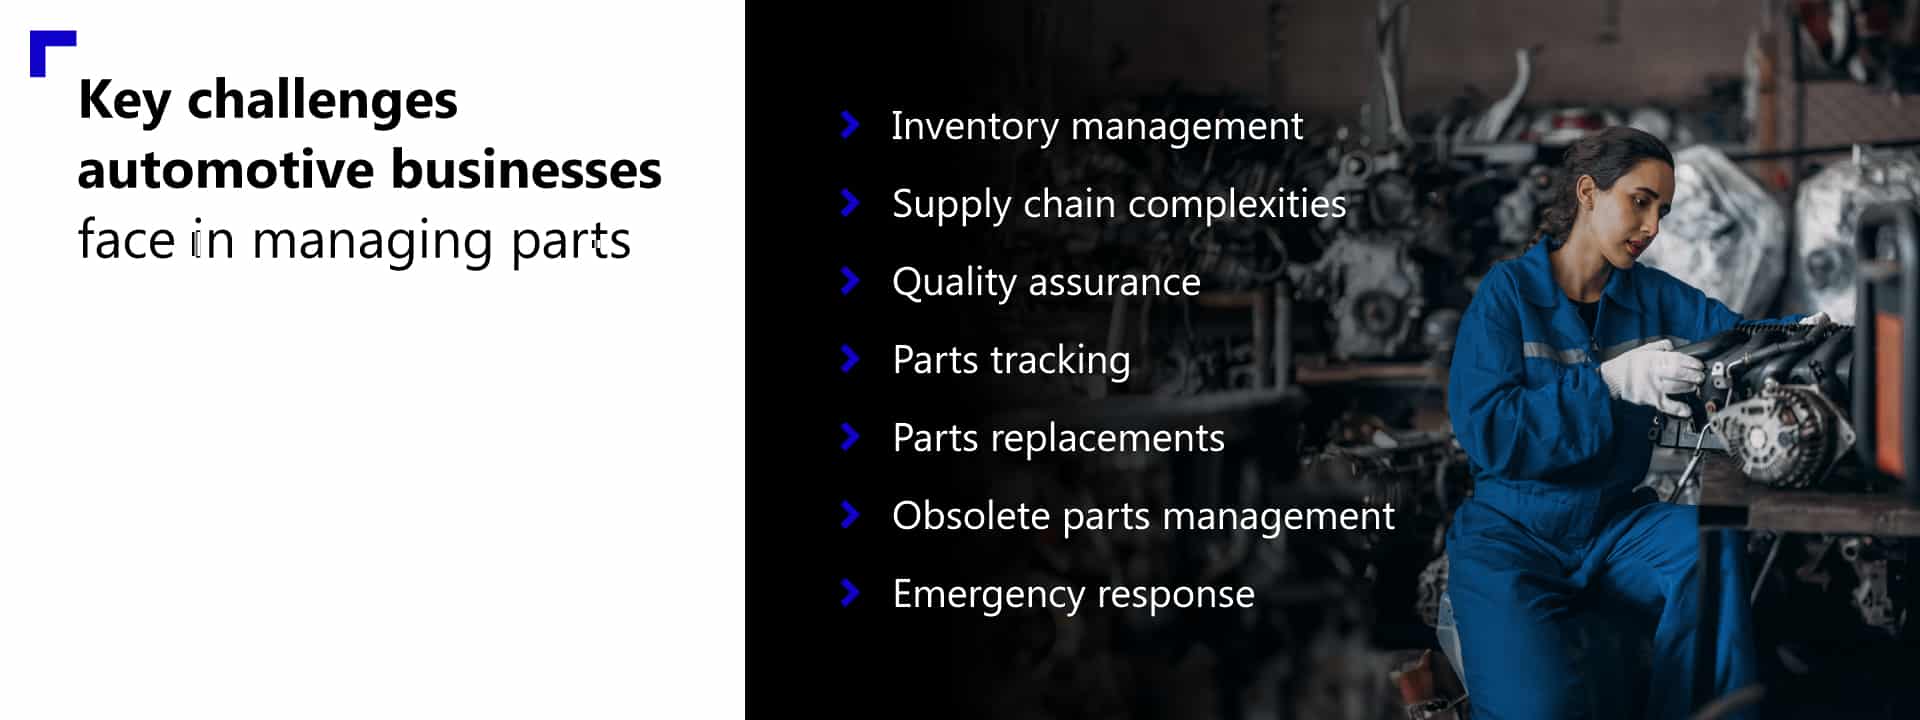 From inventory challenges to efficient parts processes: How A365 delivers results for automotive businesses 3